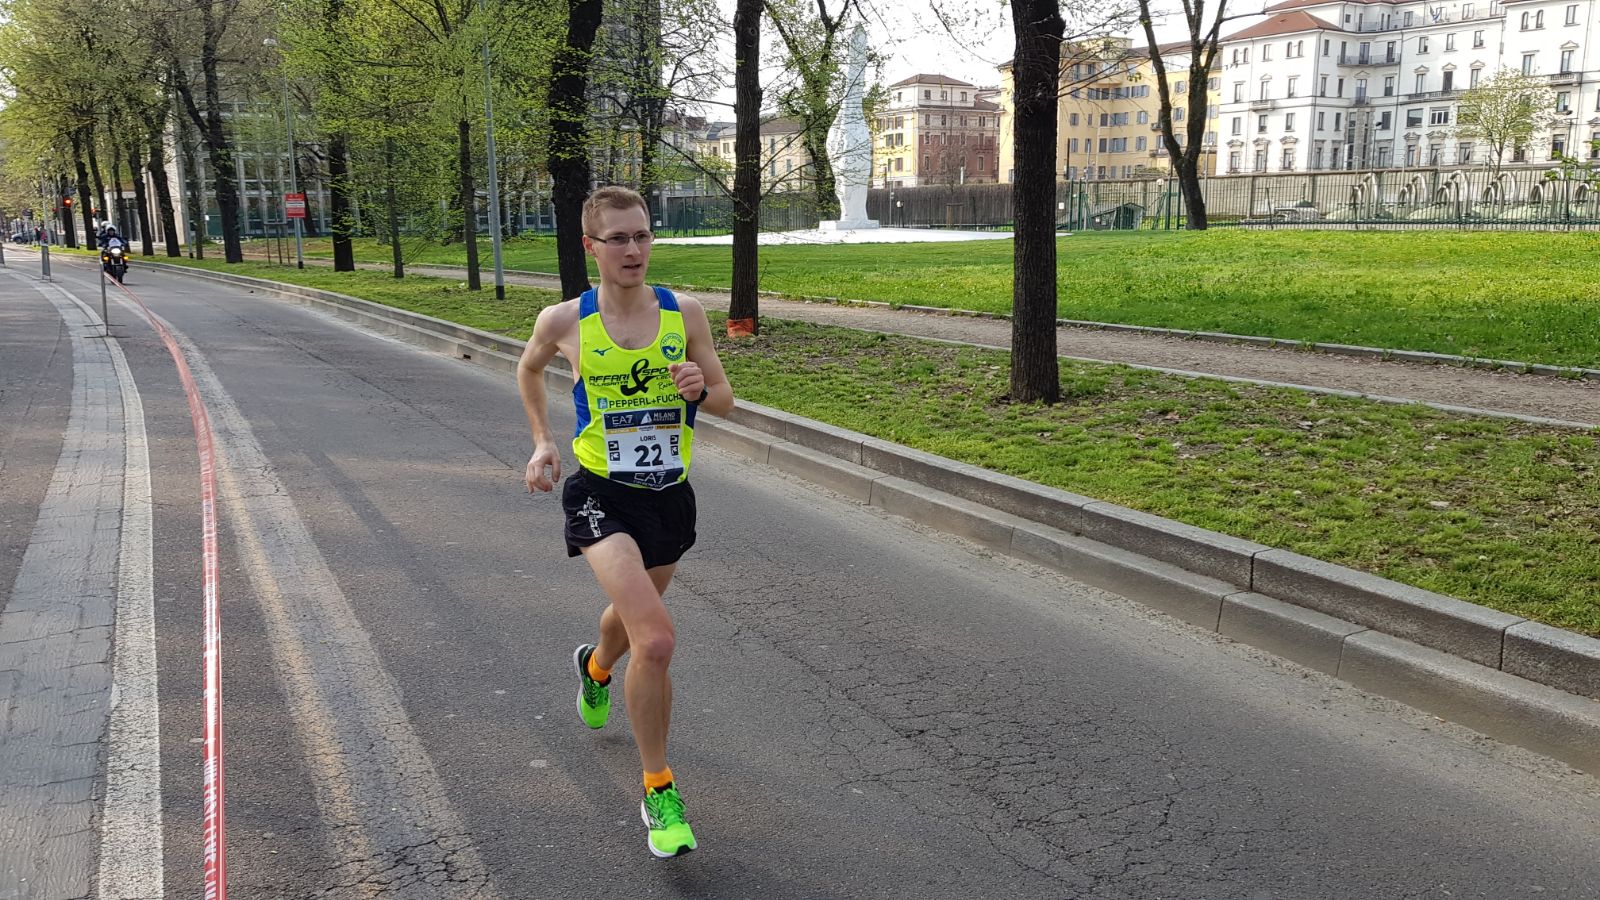 Loris, accountant at Pepperl+Fuchs, at the 30 km race in Monza.